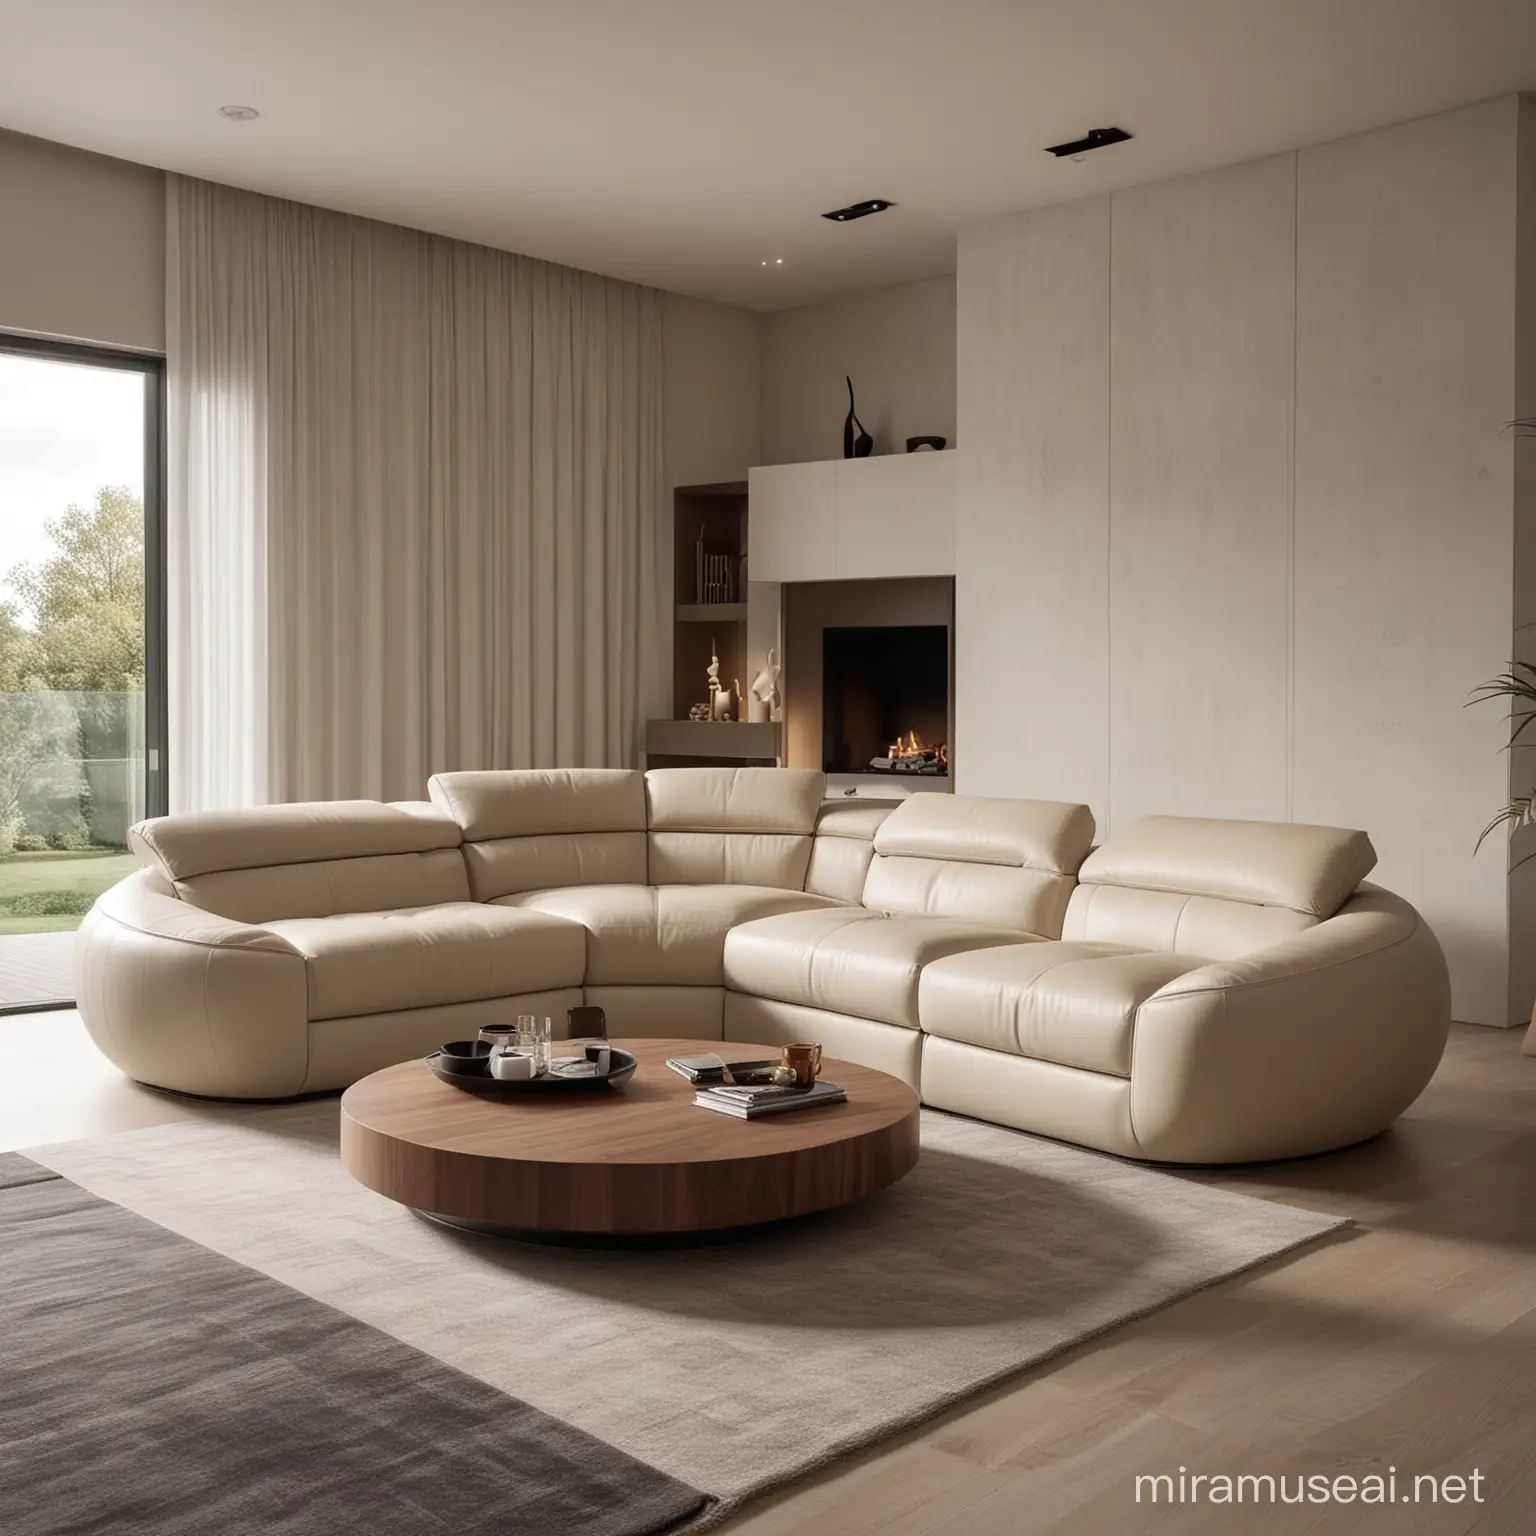 Modern Futuristic Living Room with Timeless Lines Luxury Sofa Design